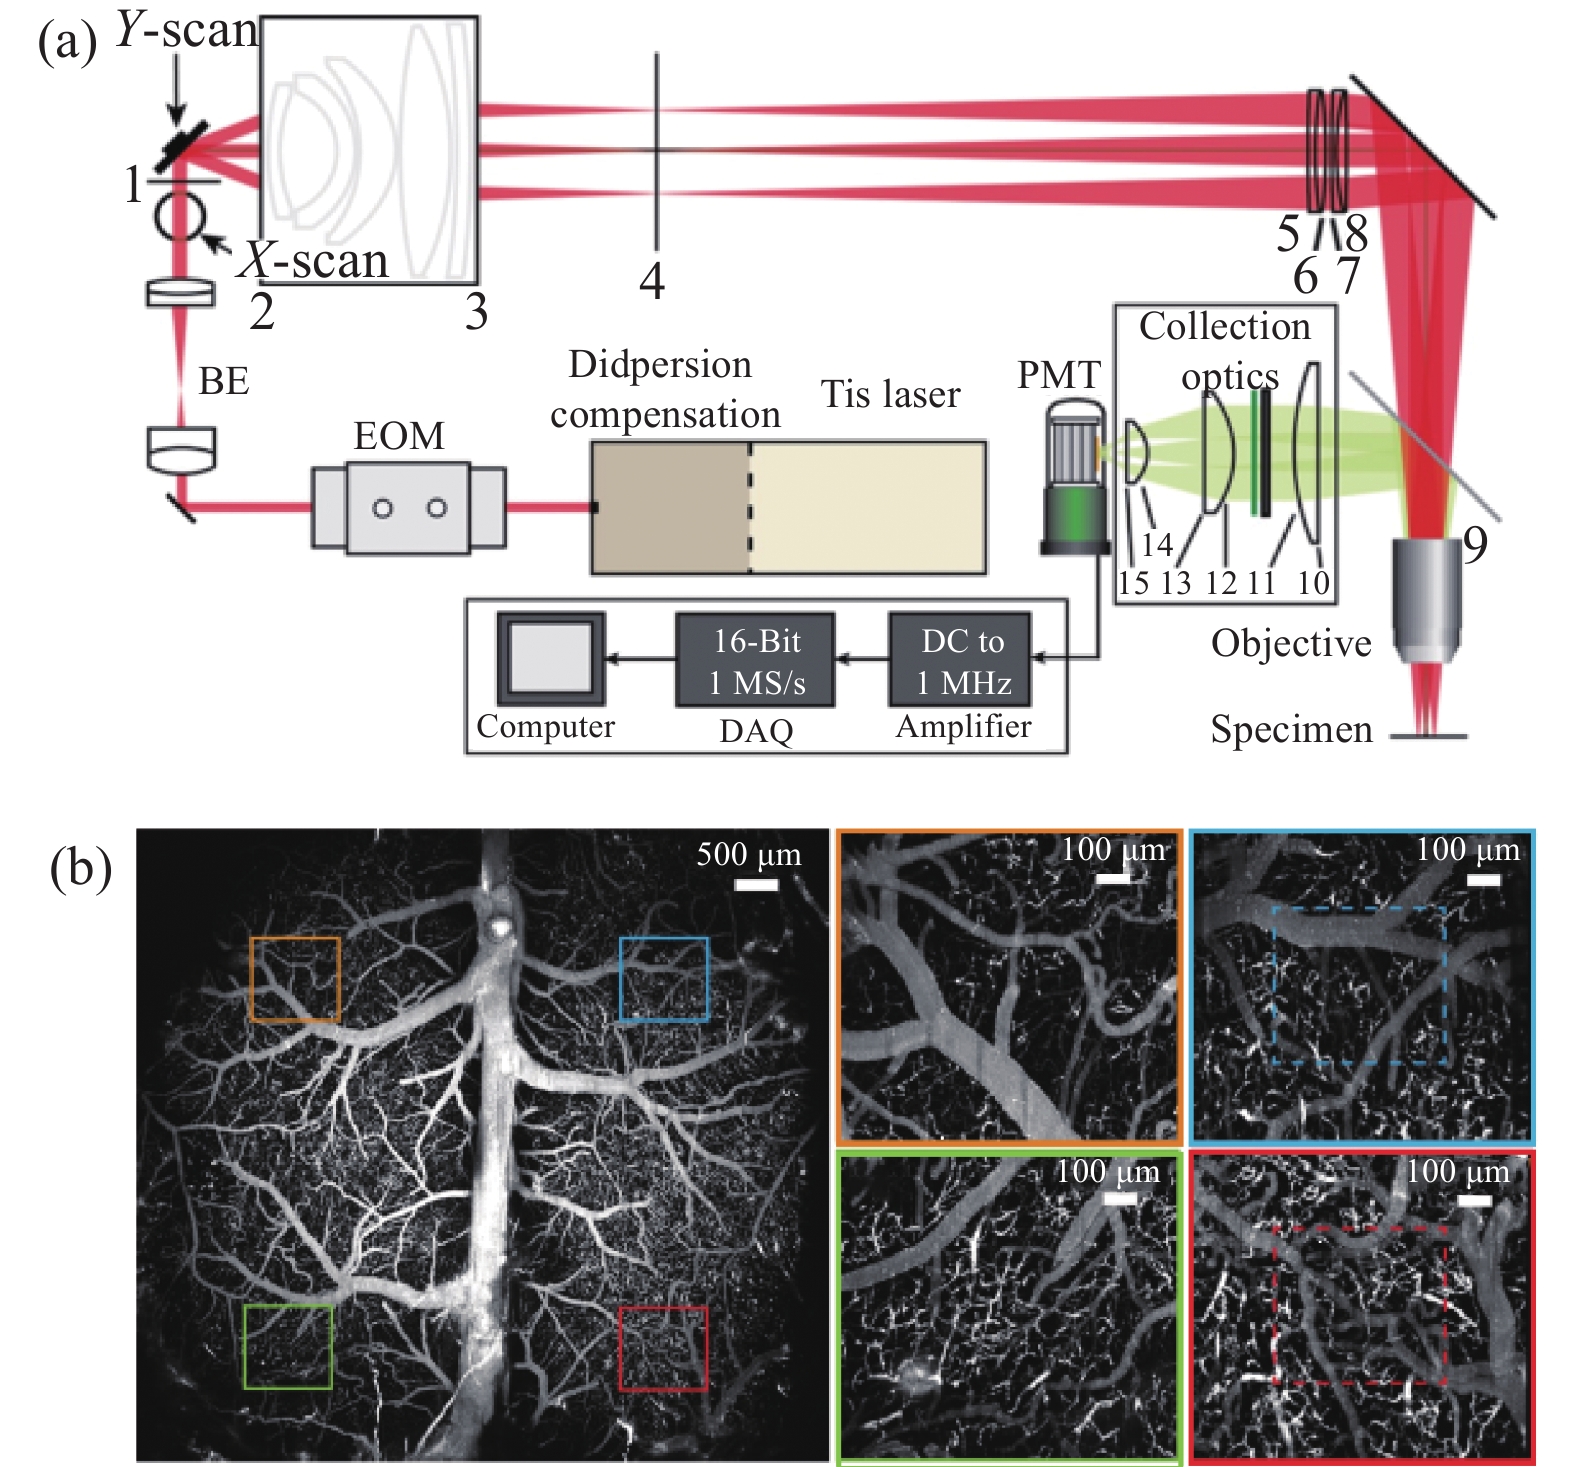 Design of a large-FOV two-photon microscope system using optical invariant analysis. (a) Optical layout; (b) Cerebral vasculature imaged over the mouse cortex with the large-FOV two-photon microscopy